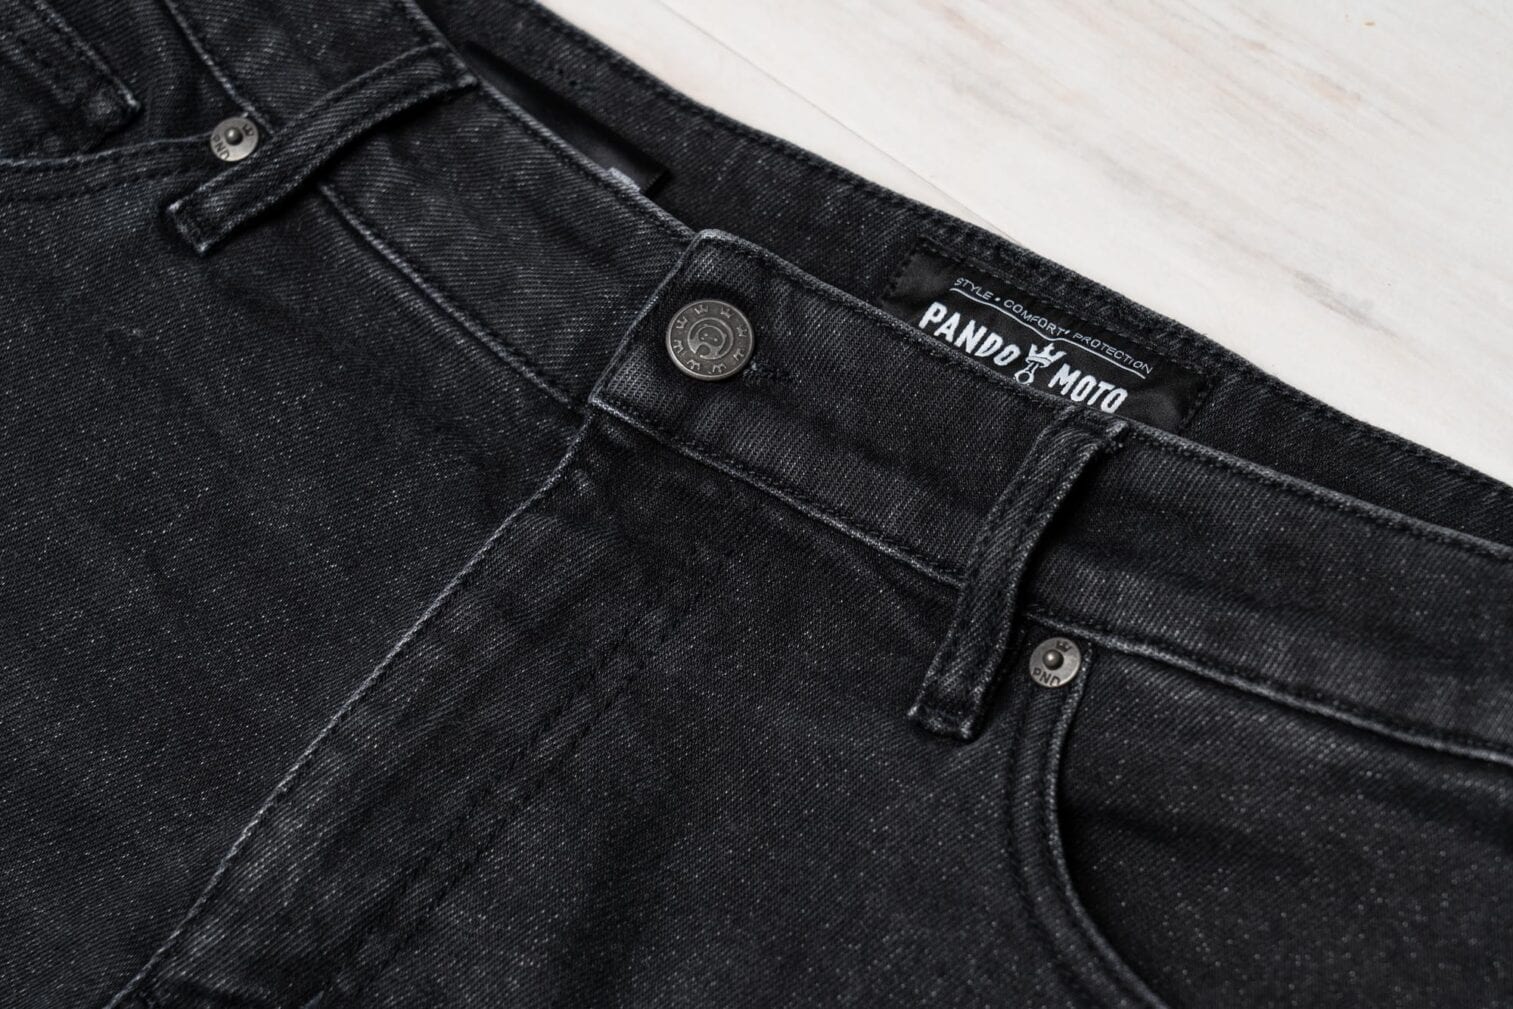 [REVIEW] Pando Moto Robby Arm Jeans - Return of the Cafe Racers